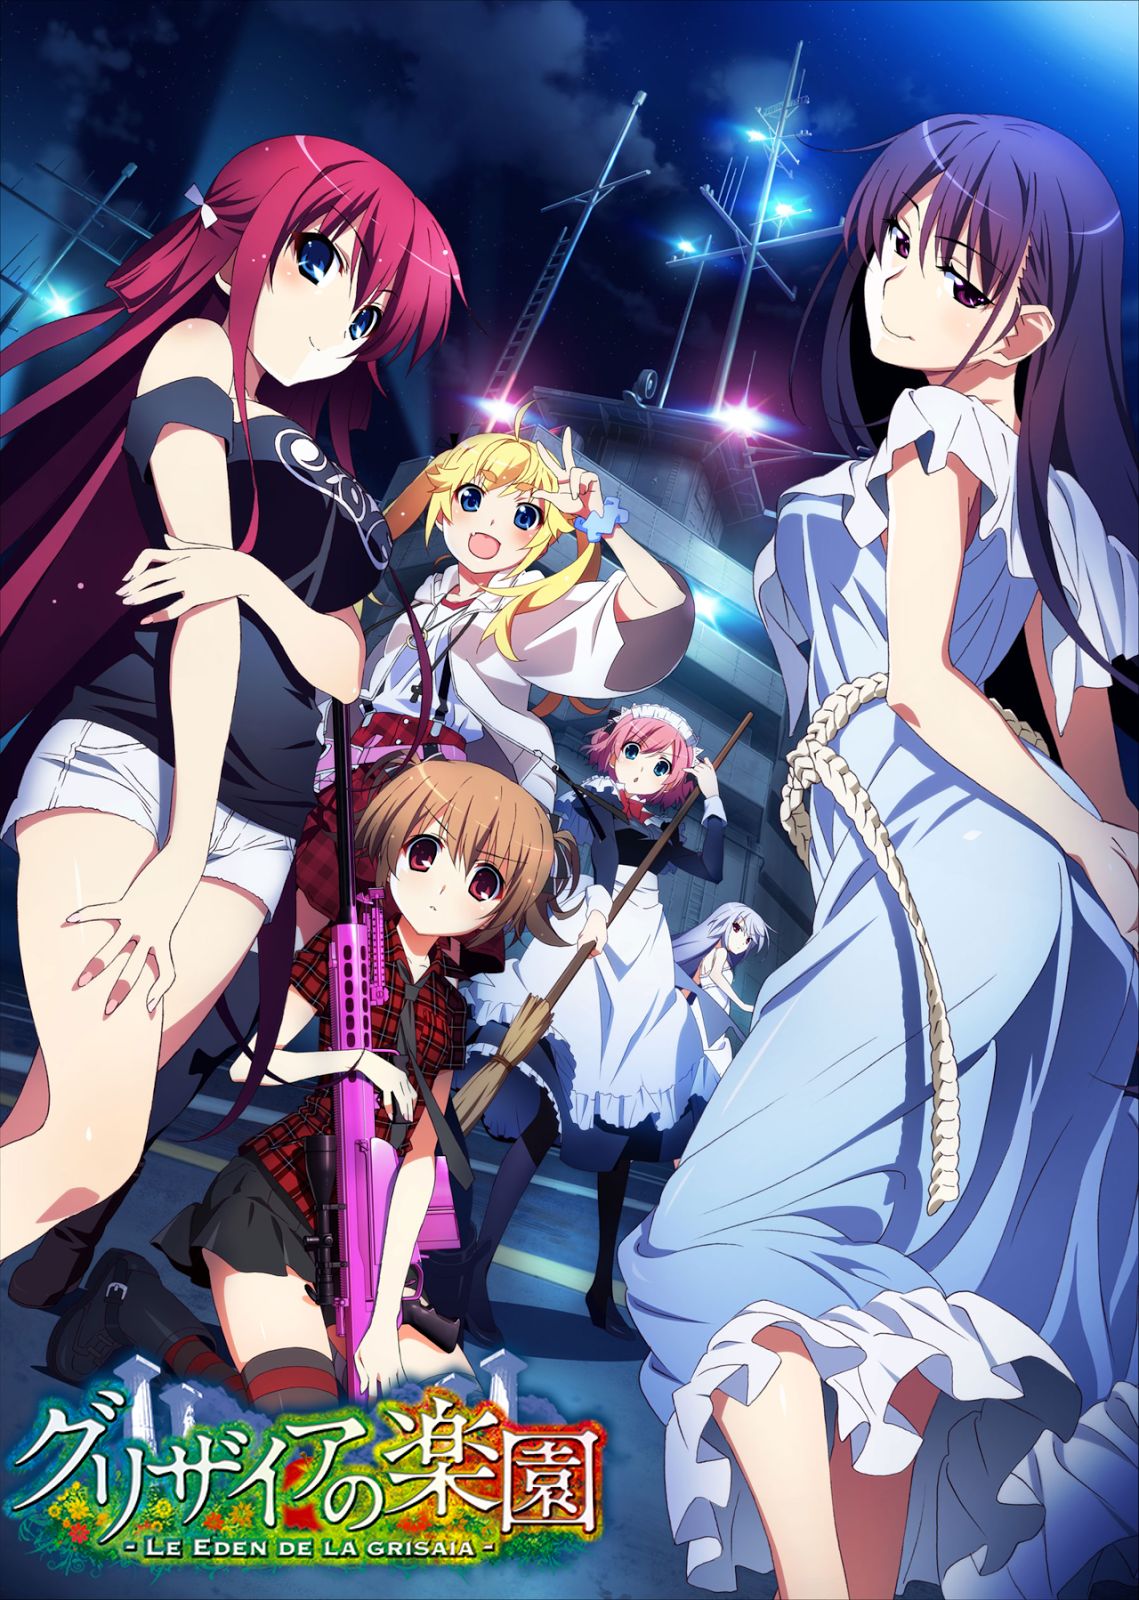 The Eden Of Grisaia Unrated Version Download - Colaboratory